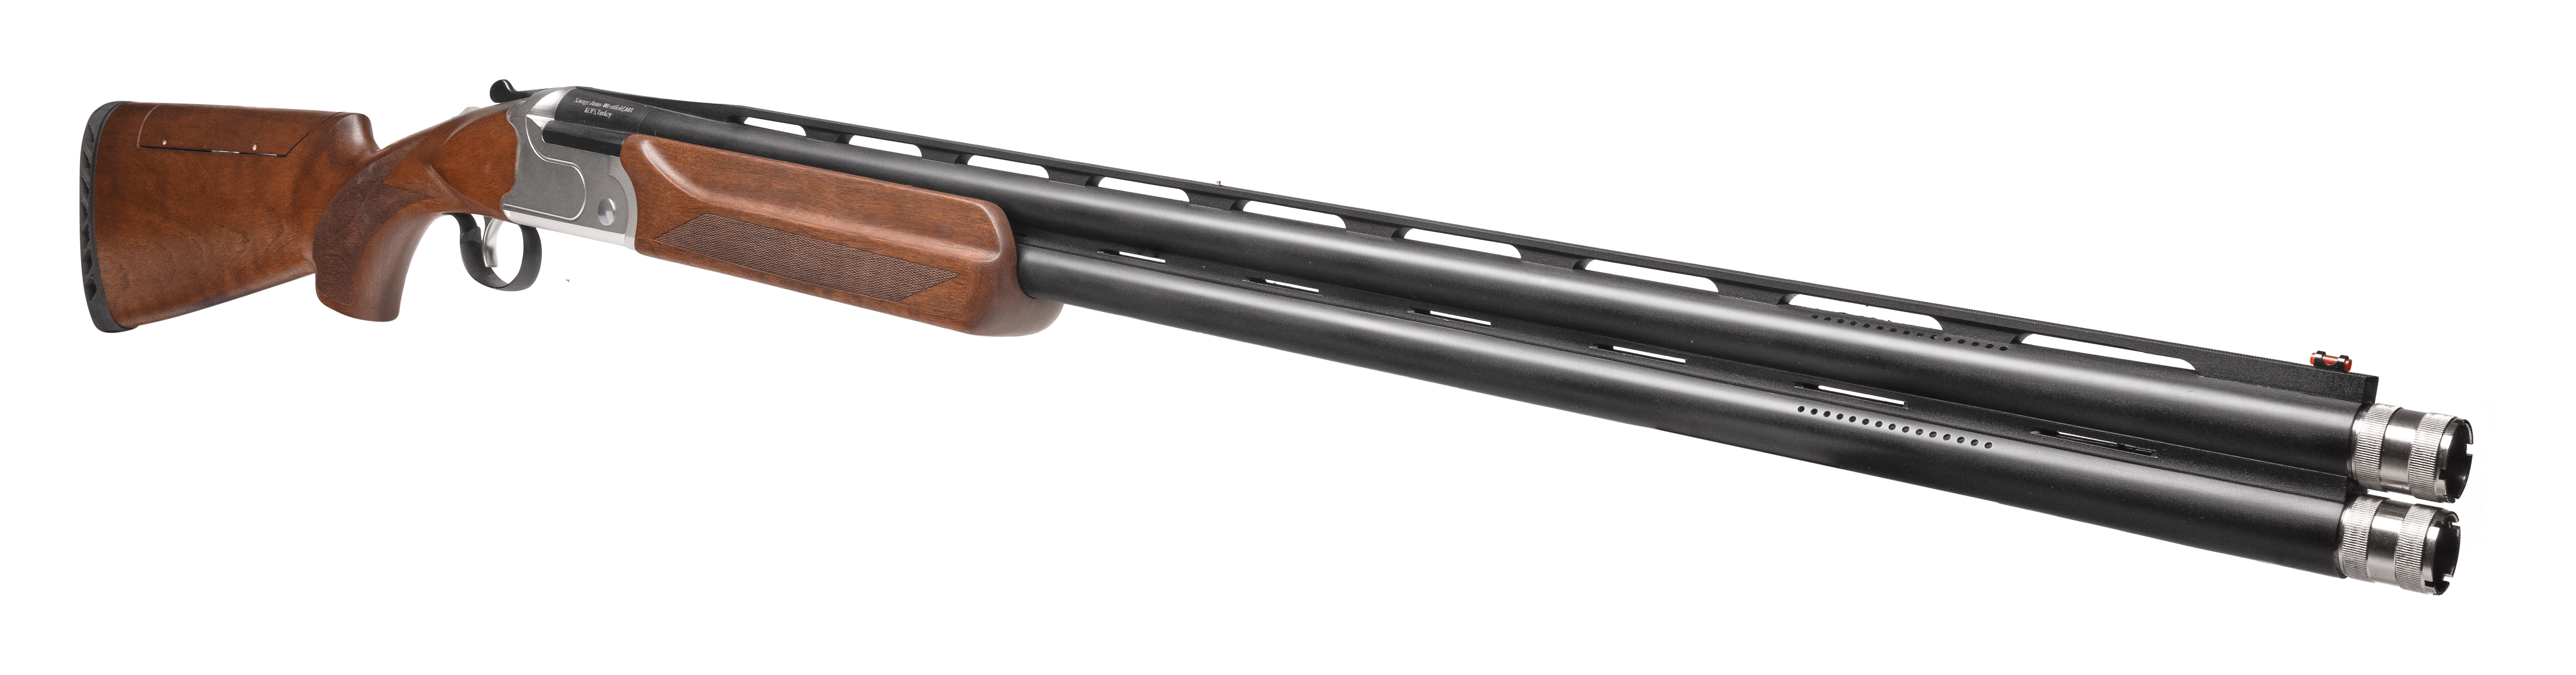 Introducing the New Stevens 555 Sporting Model Over Under 12 Gauge